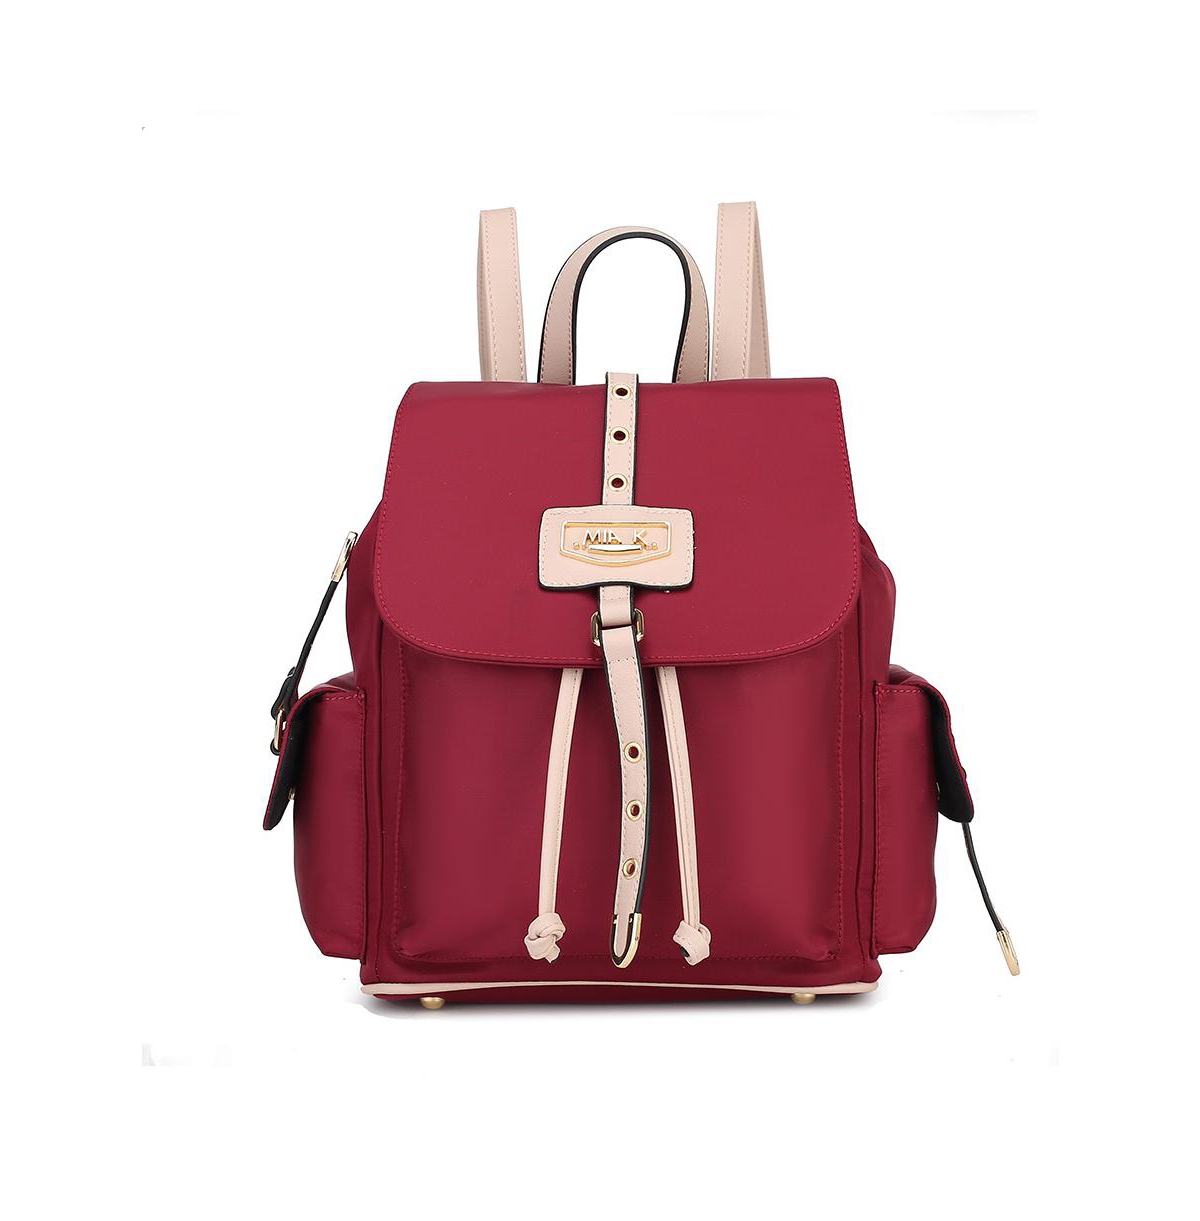 Mfk Collection Paula Backpack by Mia K. - Wine